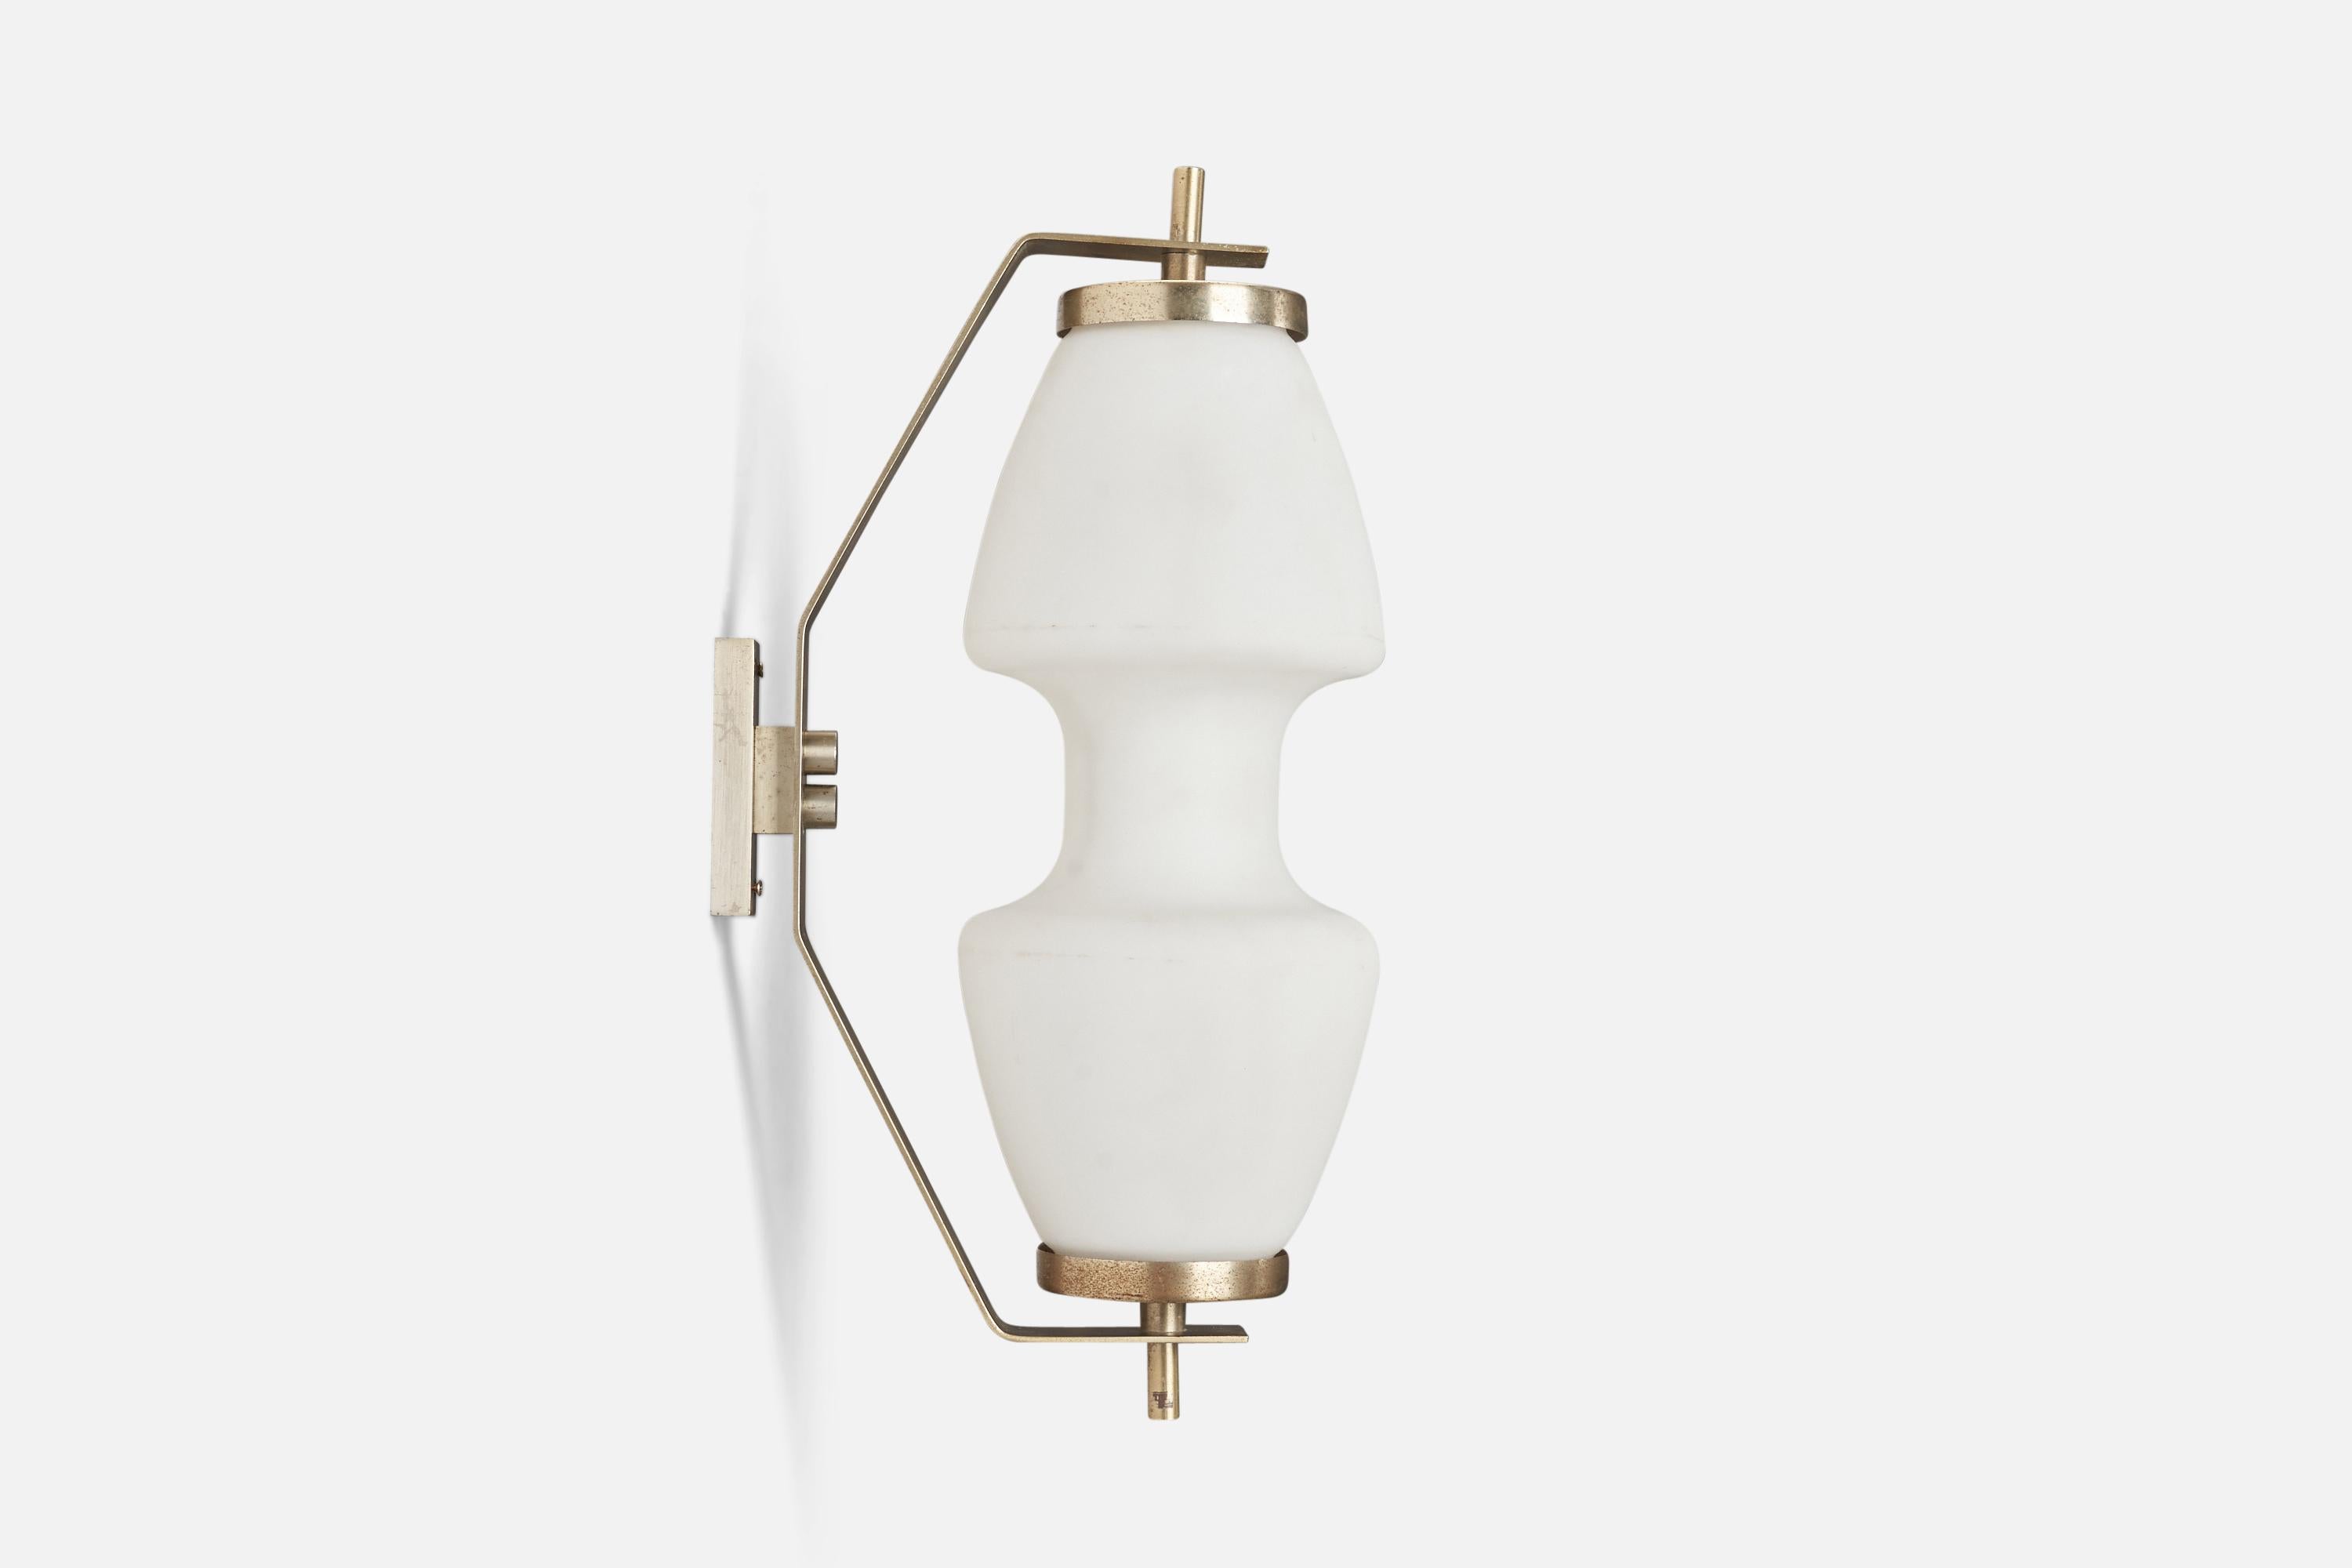 A pair of nickel-plated brass, milk glass wall lights designed and produced by an Italian Designer, 1950s.

Dimensions of back plate (inches) : 4 x 1.1 x 0.5 (Height x Width x Depth)

Sockets take standard E-26 medium base bulbs.

There is no